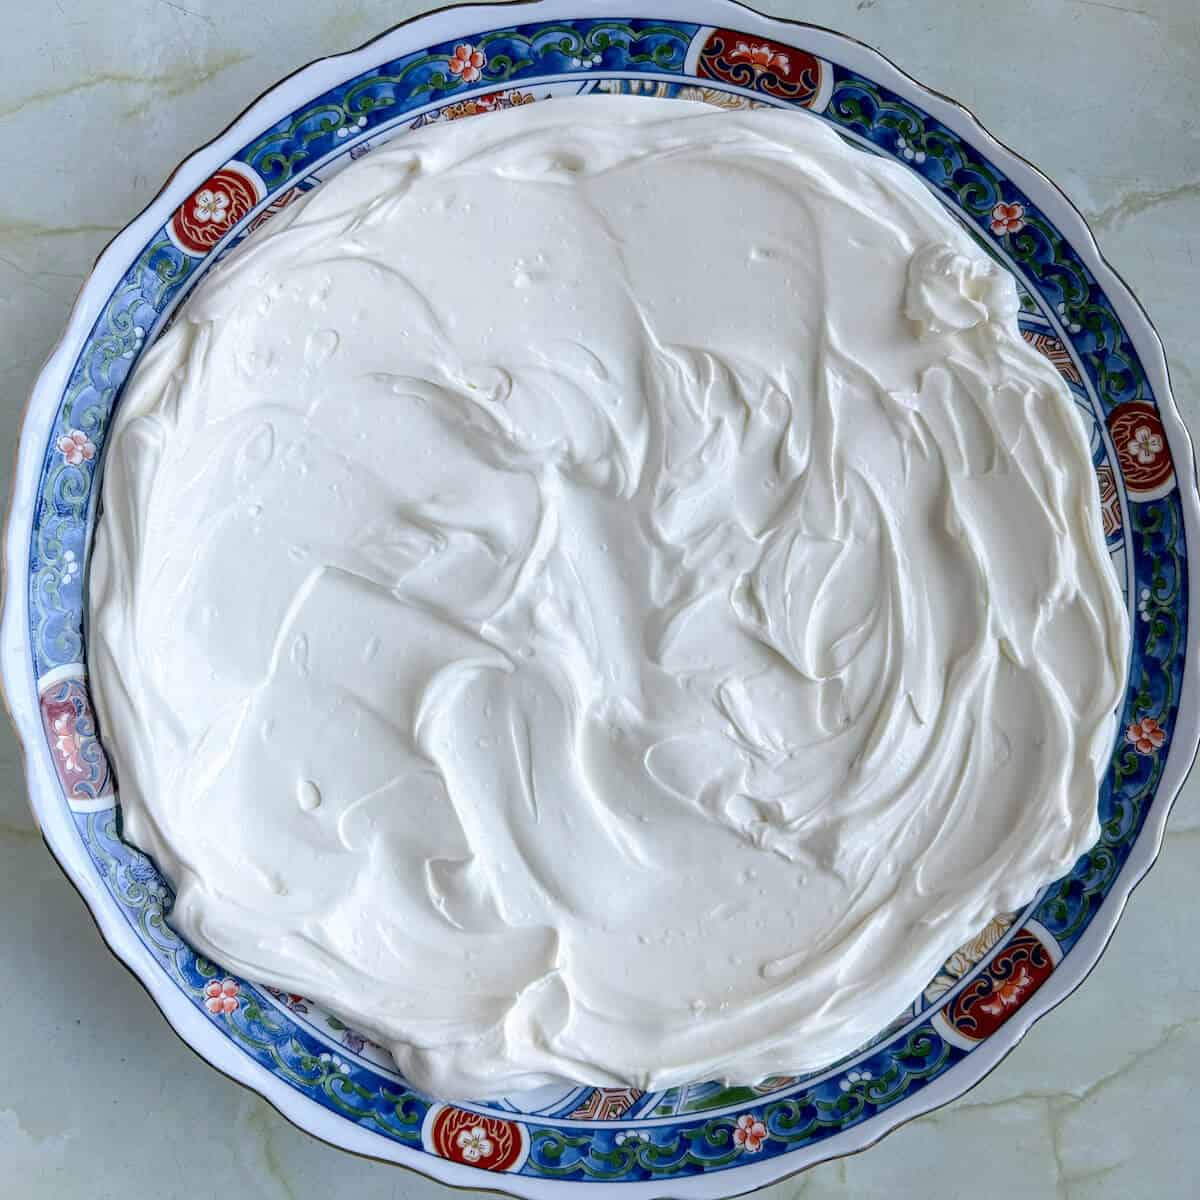 An ornate serving platter with cream cheese and sour cream dip spread over the surface. 